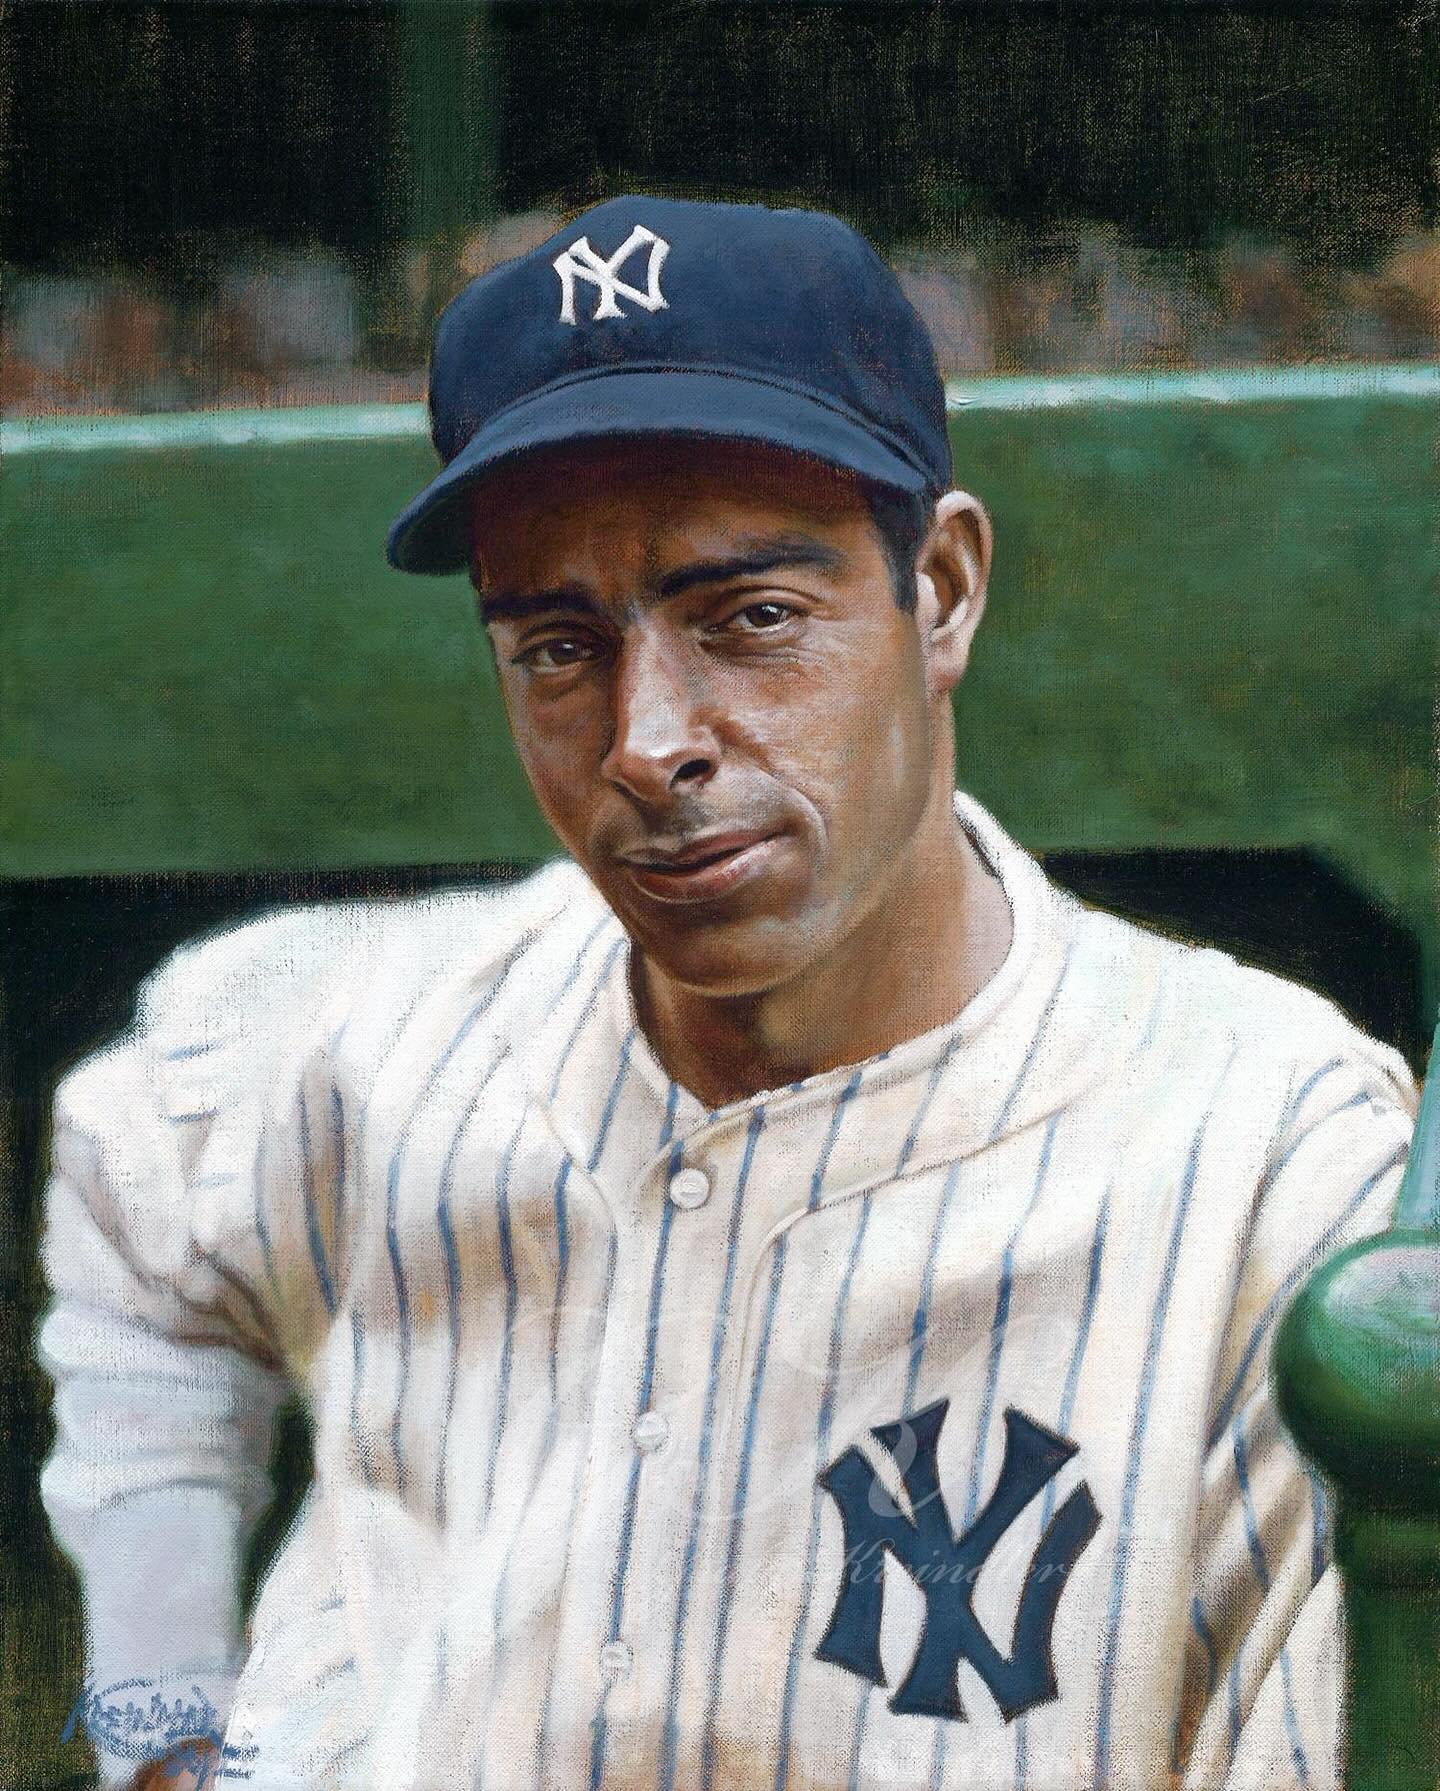 On this day in 1936, Joe DiMaggio made his regular season debut it with the Yankees, collecting three hits (one of which is a triple) in a 14-5 romp over the Browns. Here&rsquo;s my painting depicting him during that season, based on the photography 